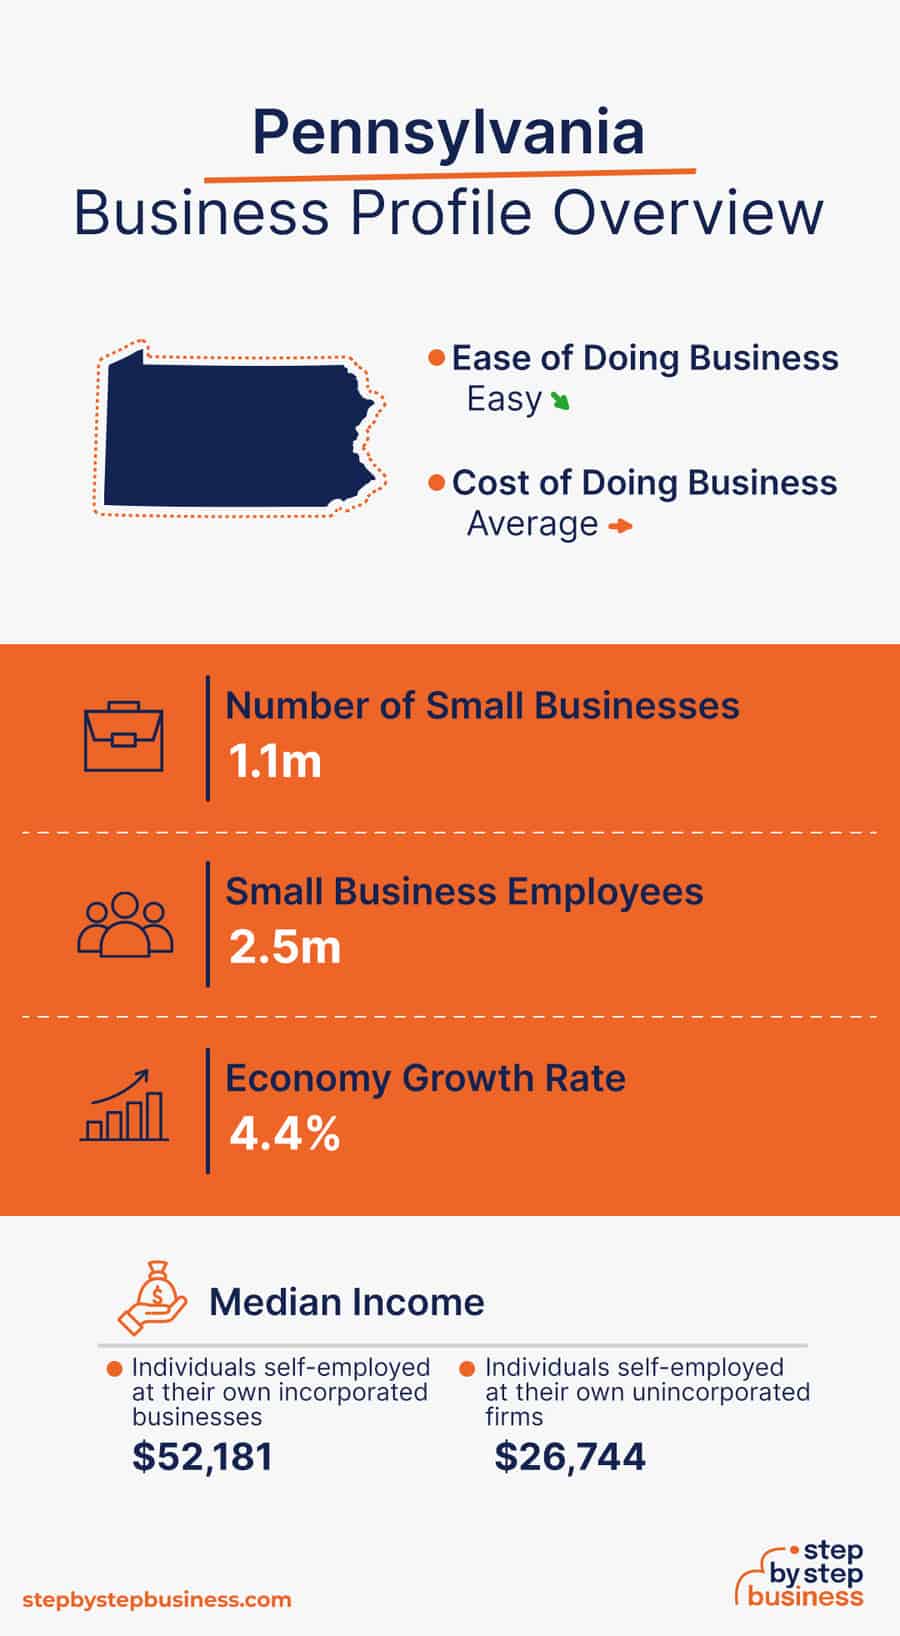 Pennsylvania Business Profile Overview